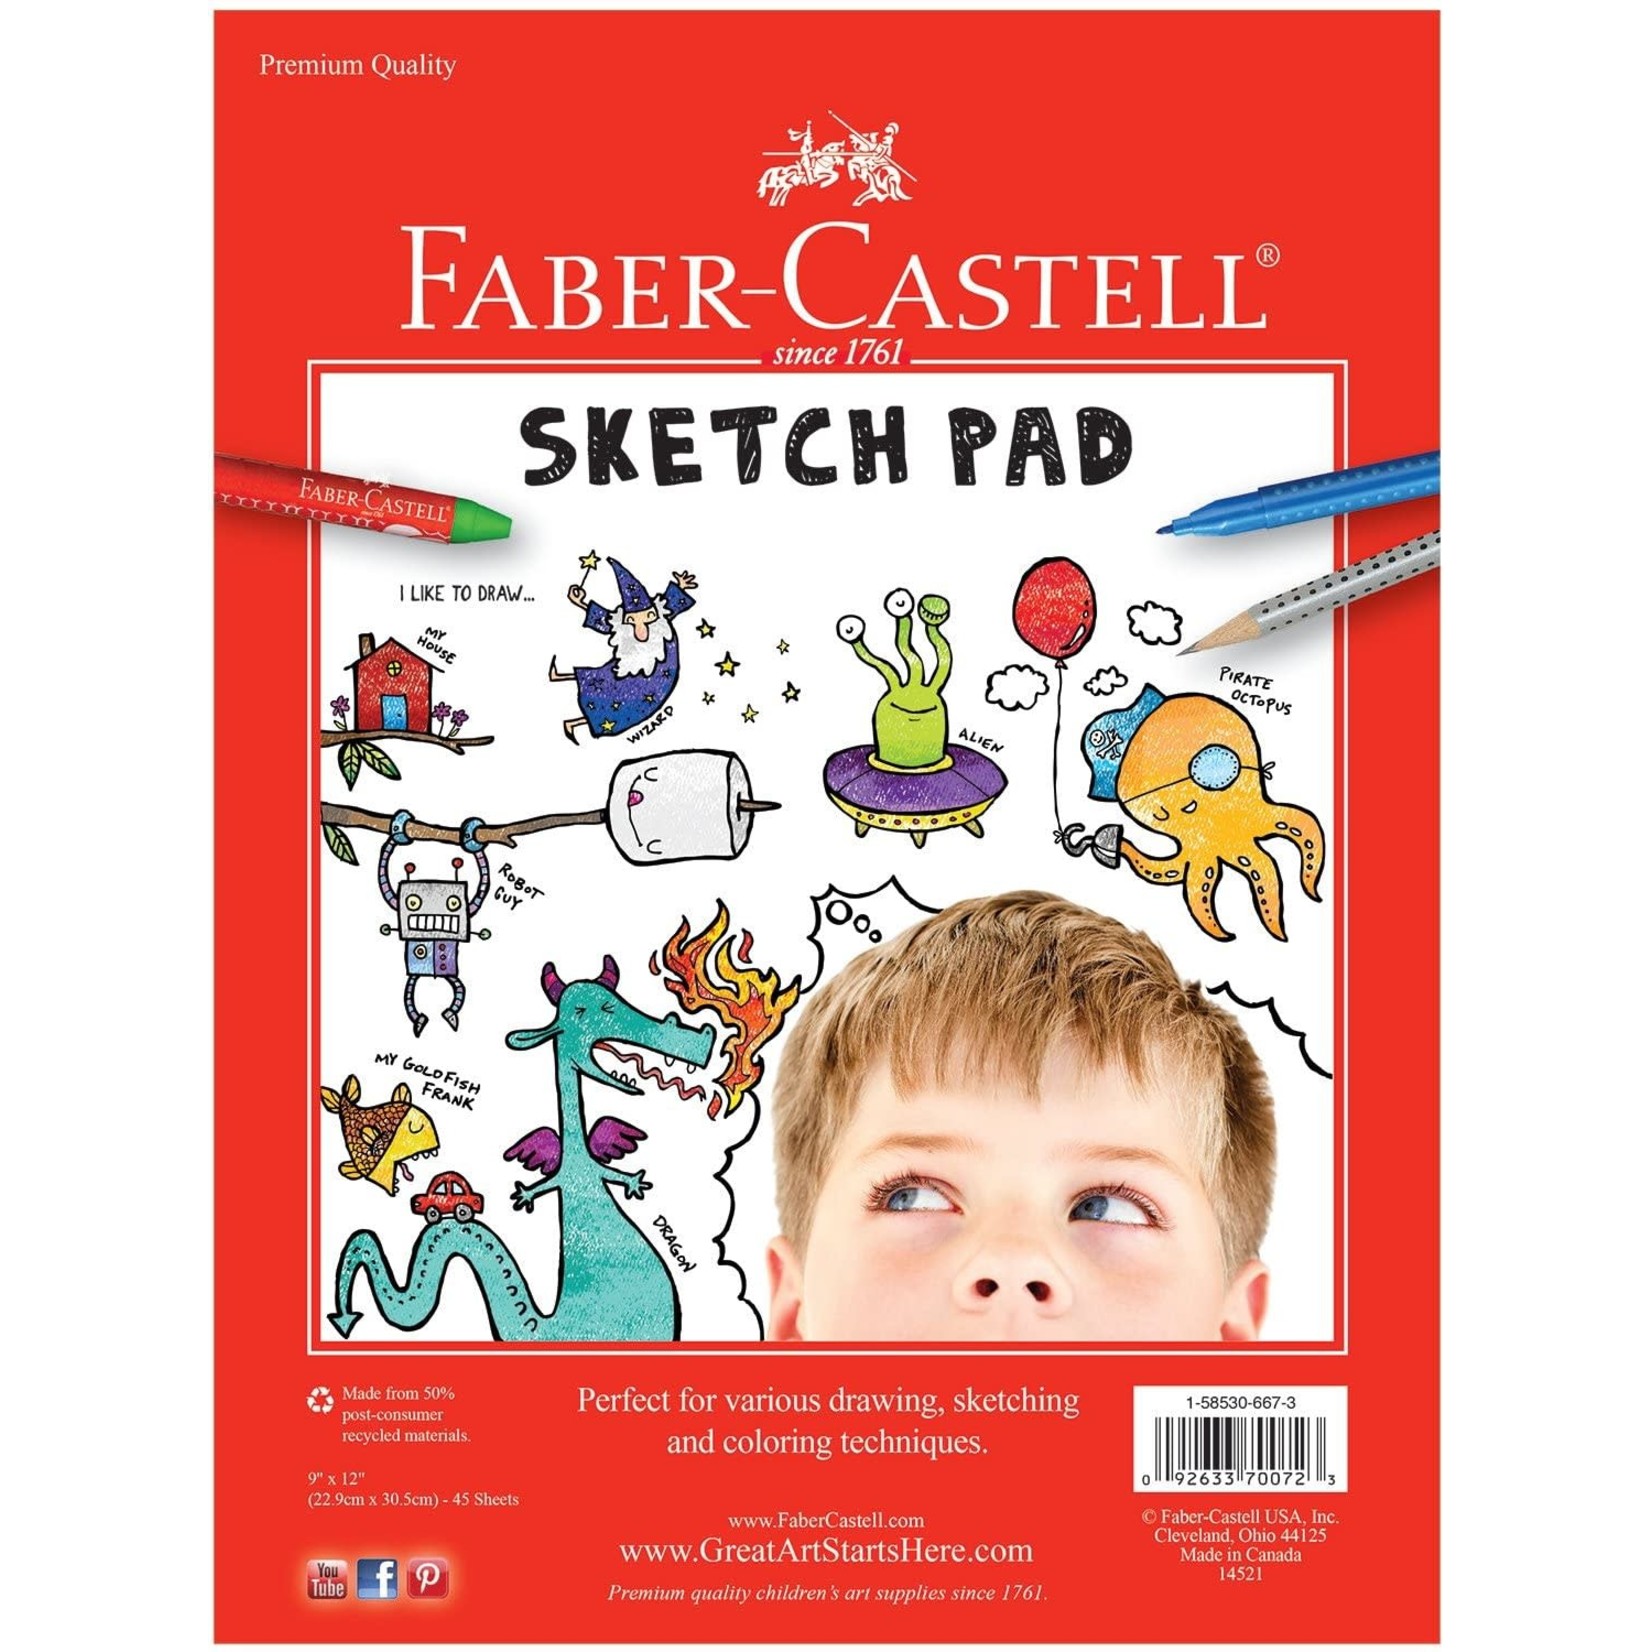 Faber-Castell Sketch Pad 9" x 12